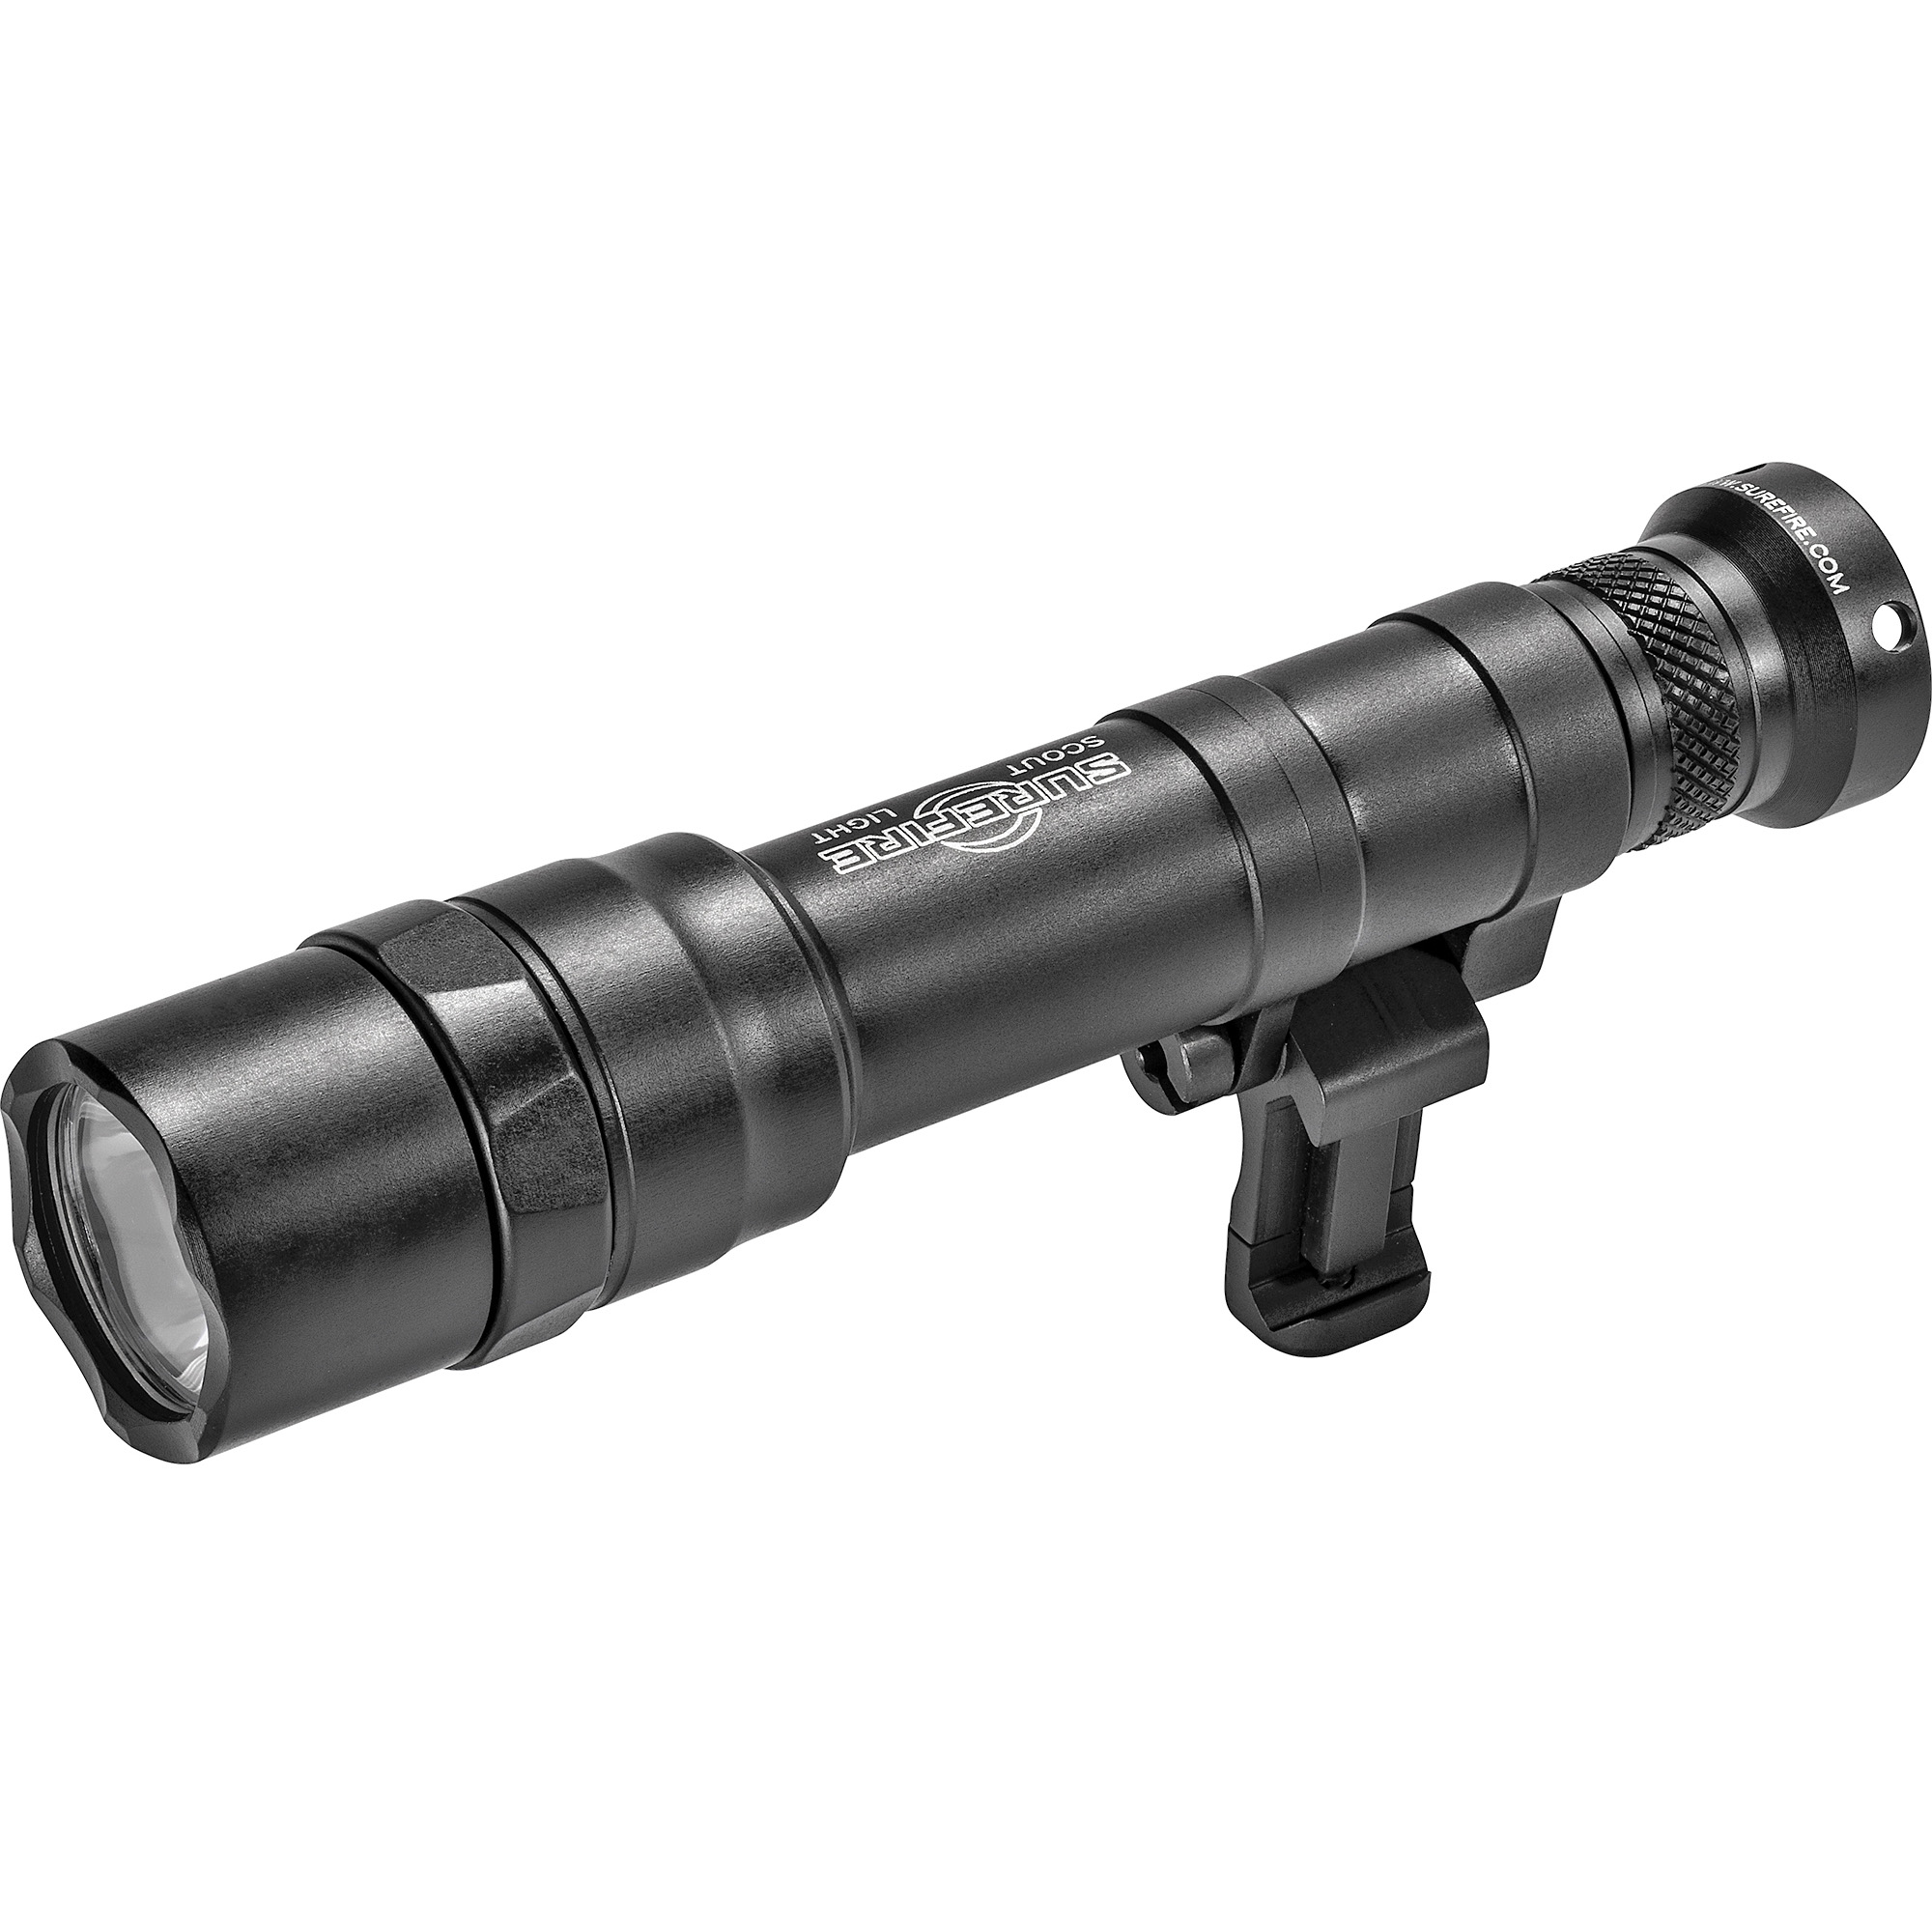 M300B Scout Light Tactical Torch Flashlight LED Light w/ Tail Switch US Stock 